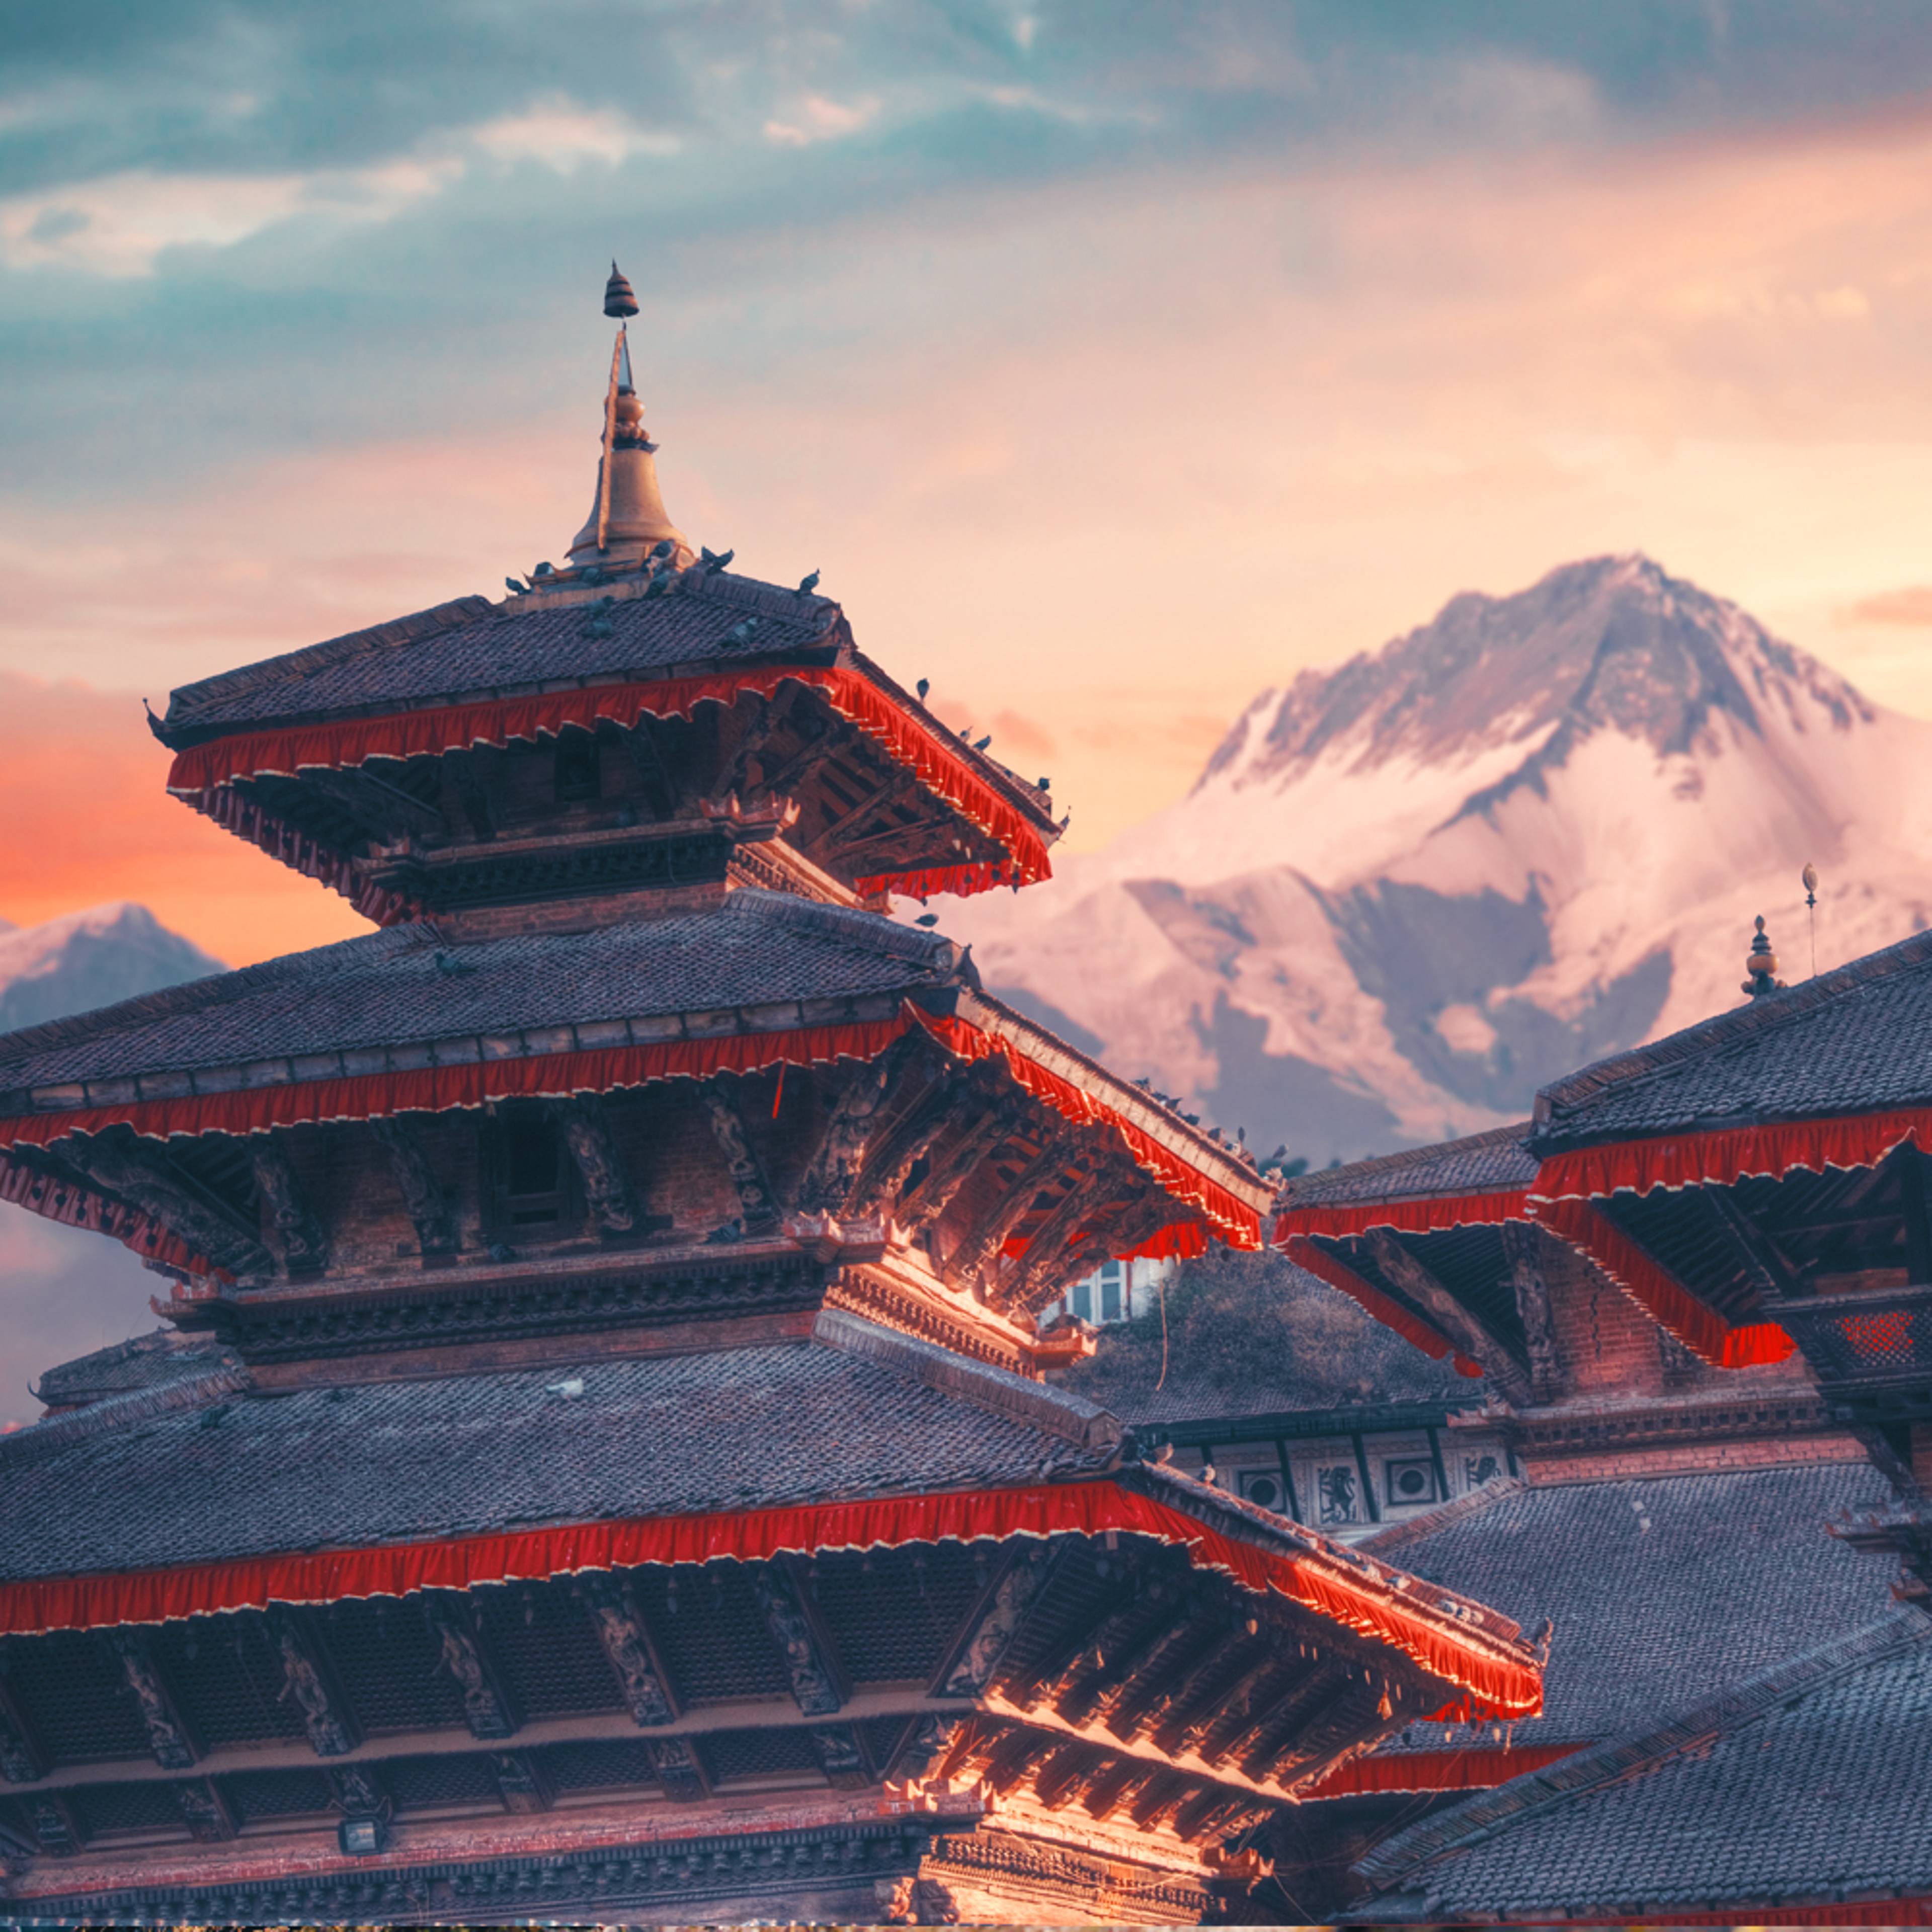 Design your perfect city tour with a local expert in Nepal